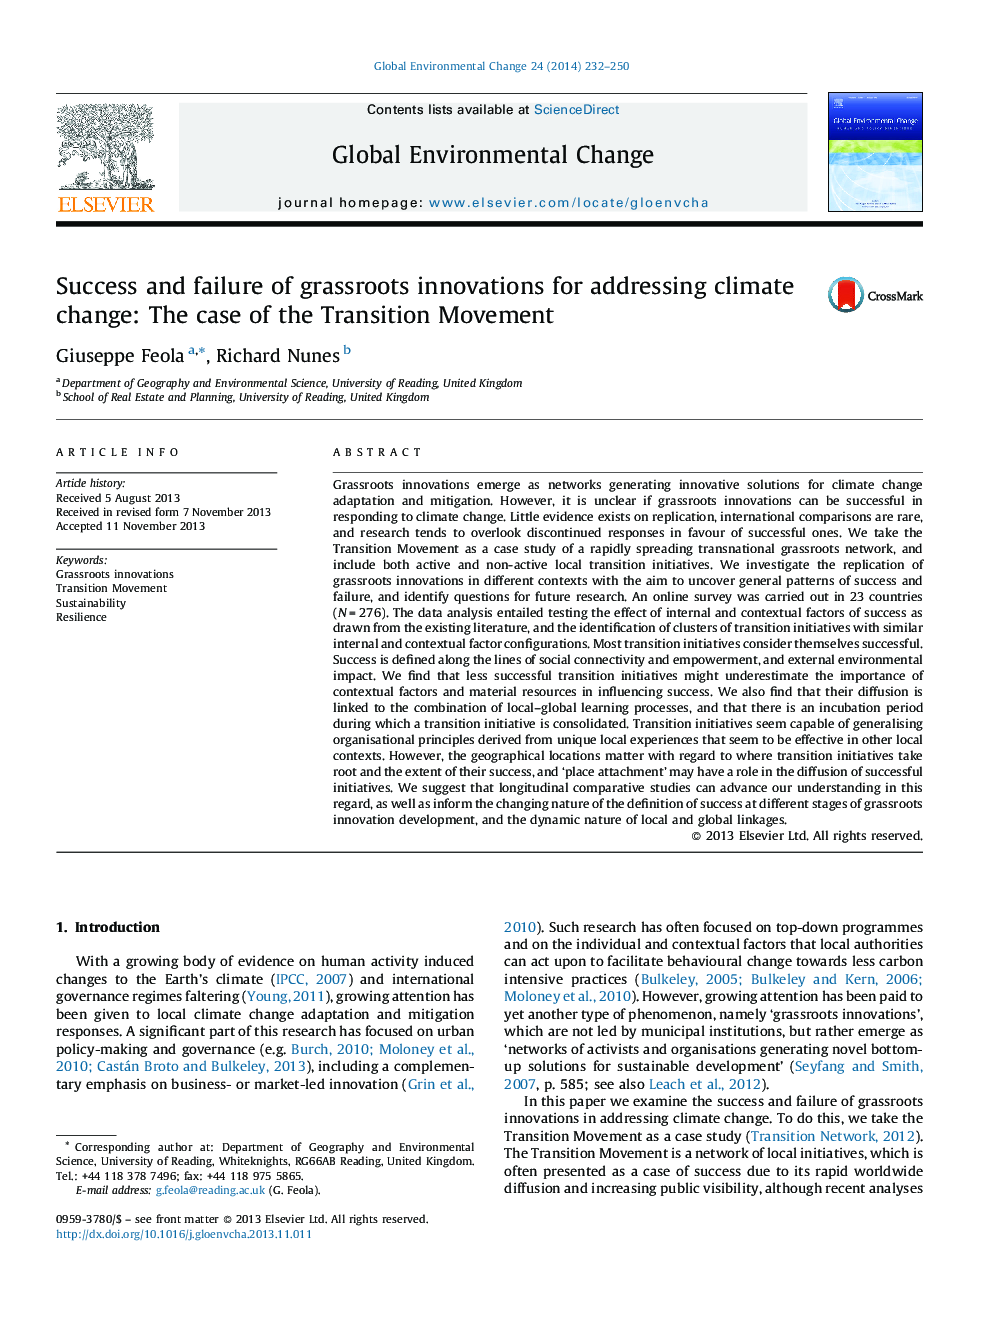 Success and failure of grassroots innovations for addressing climate change: The case of the Transition Movement